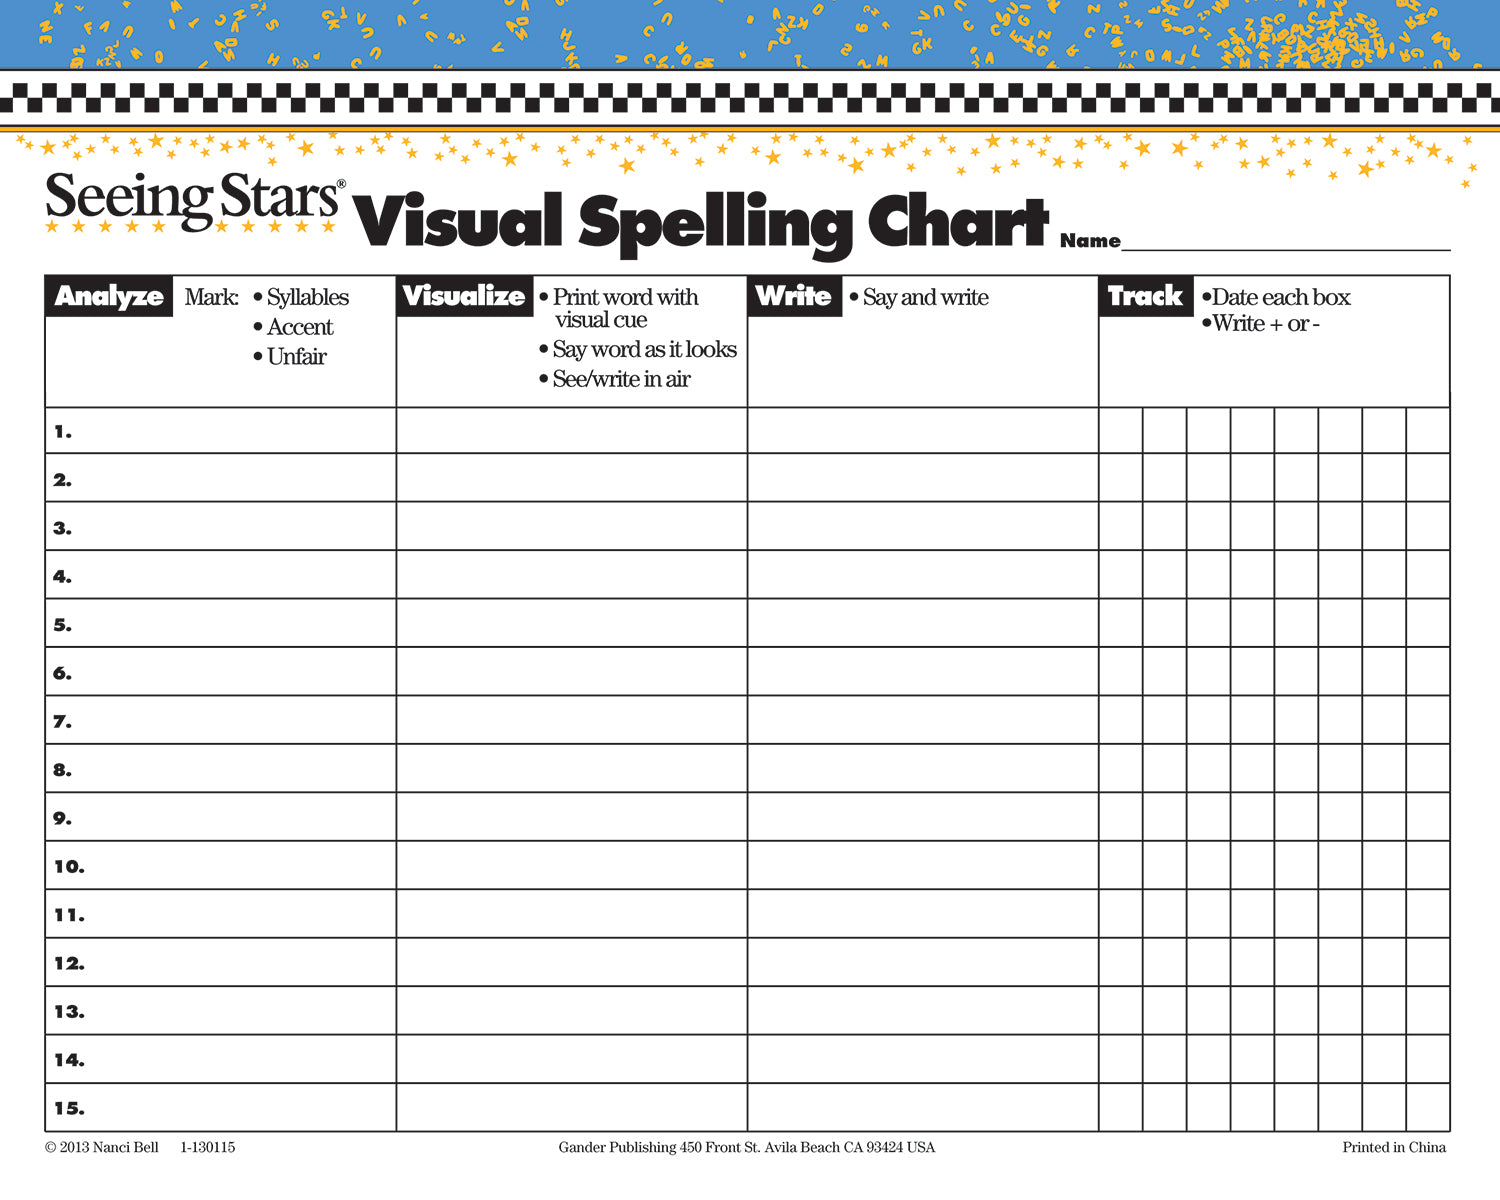 Seeing Stars® Visual Spelling Charts